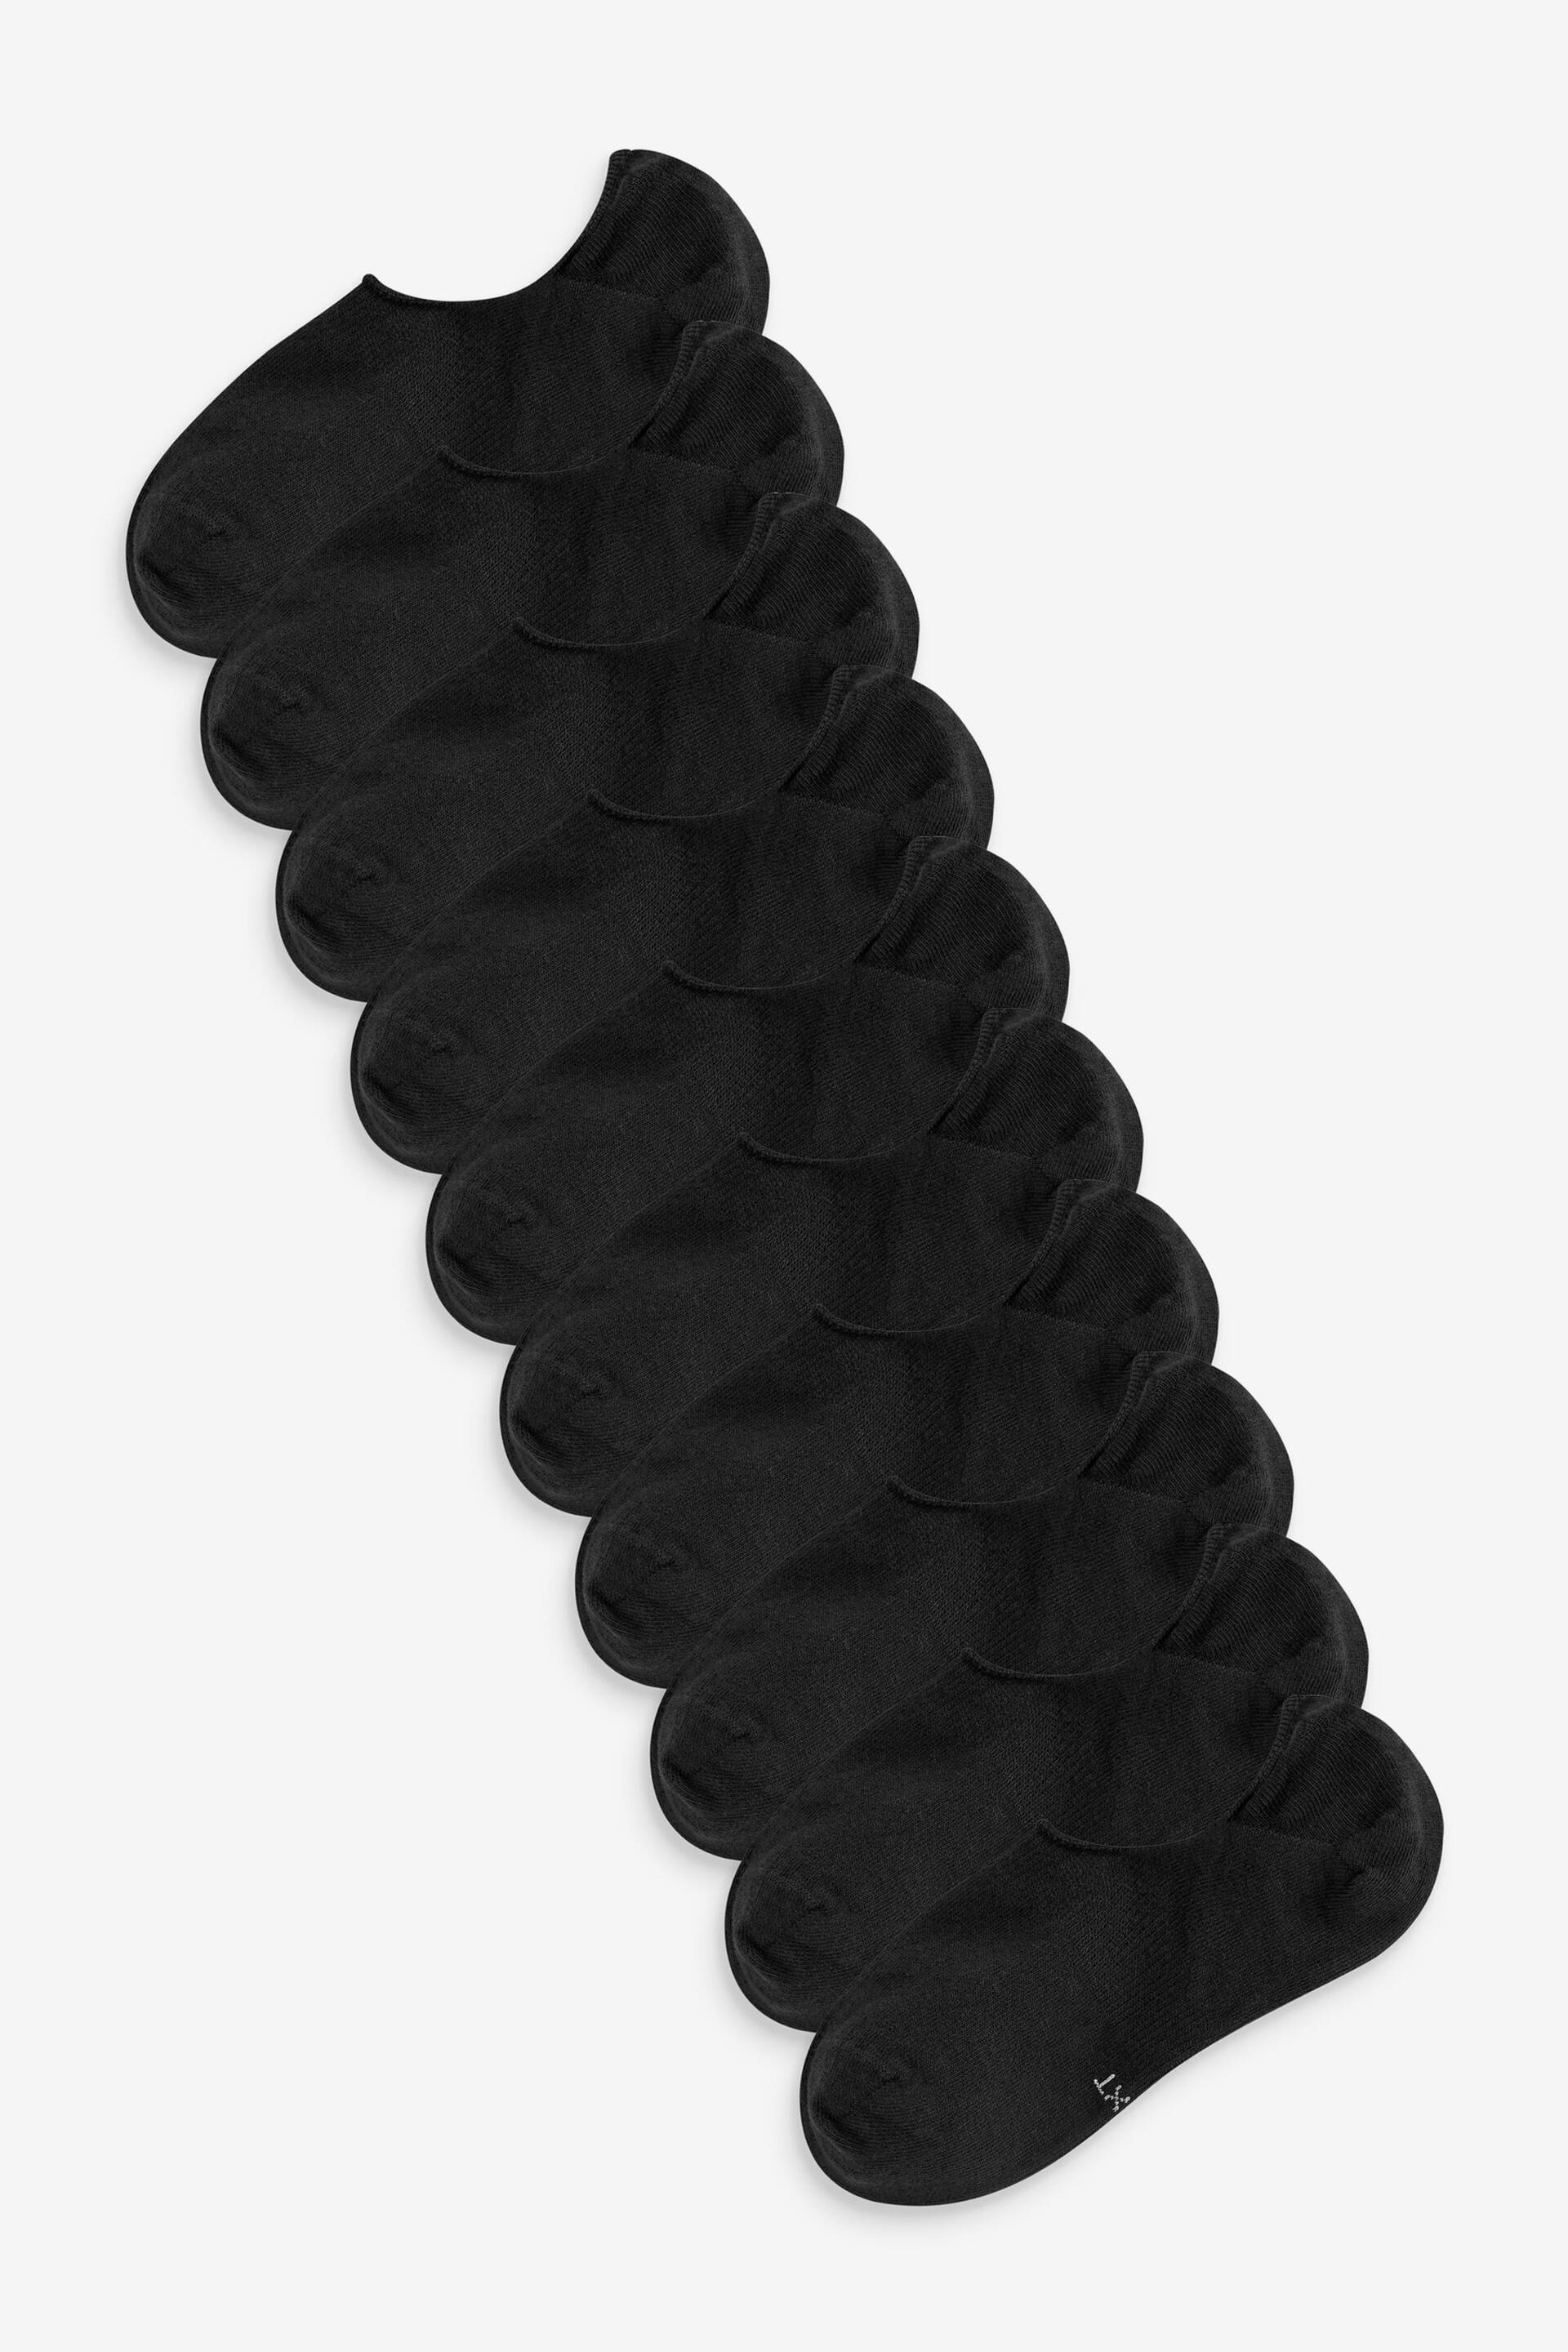 Black 10 Pack Invisible Trainers Socks - Image 1 of 4